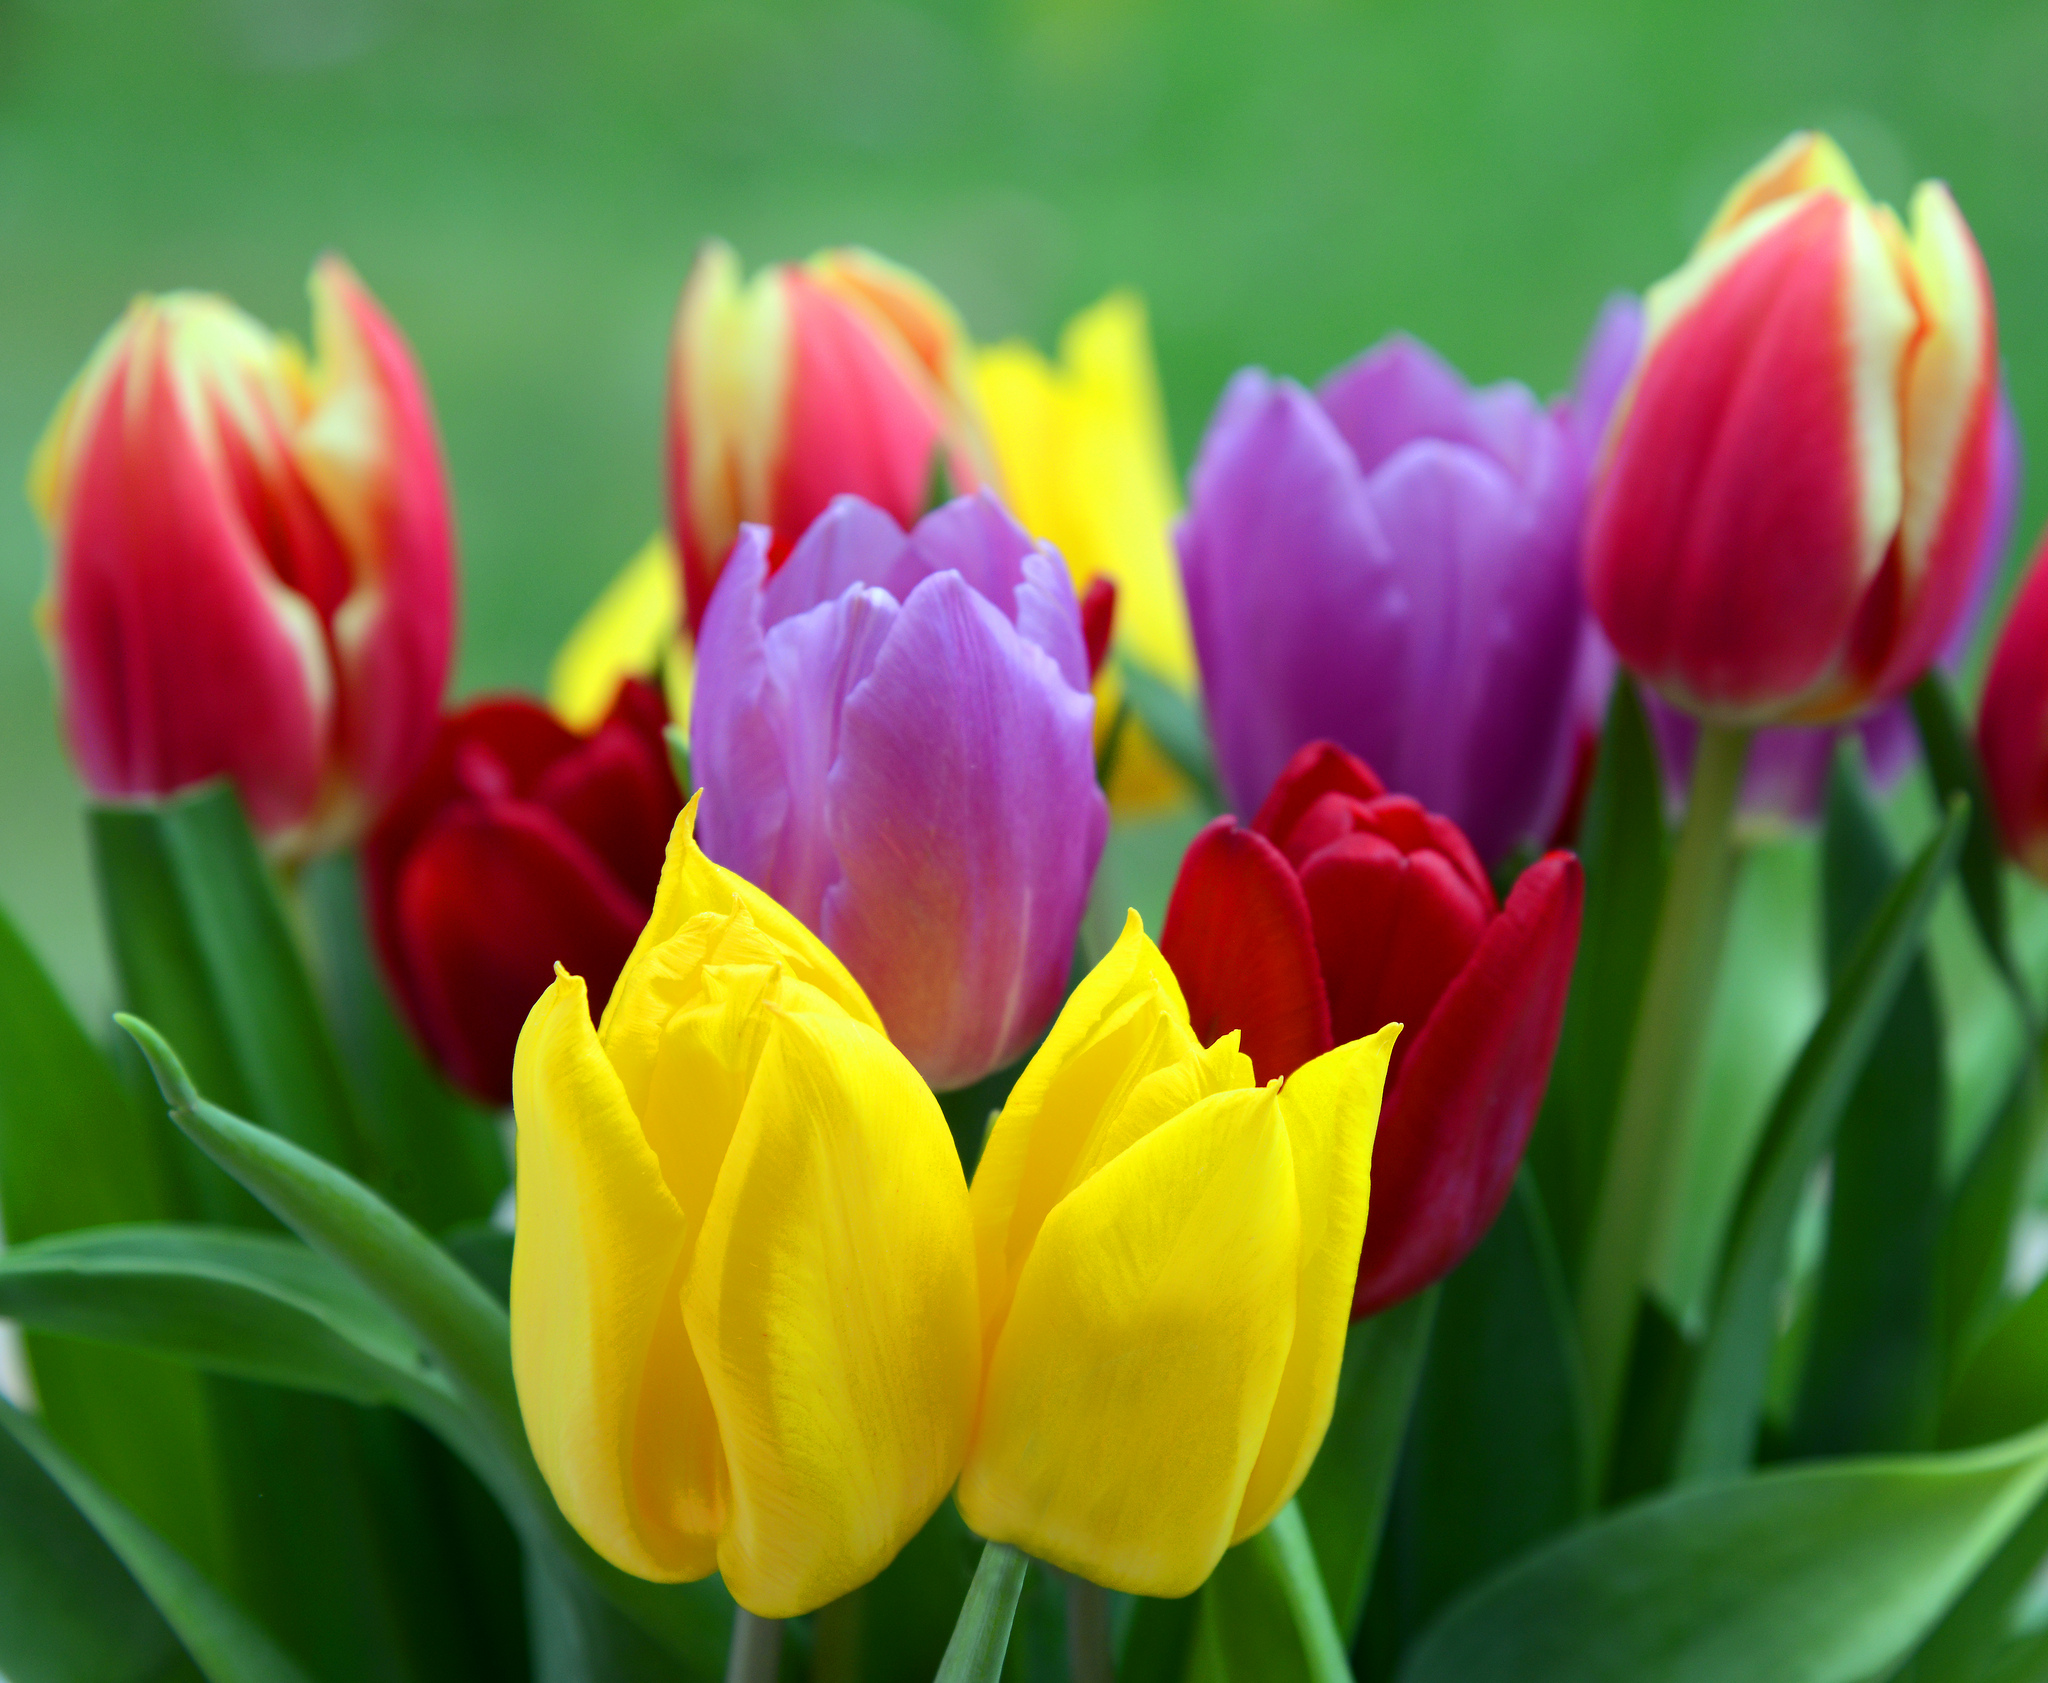 Tulips in different colors